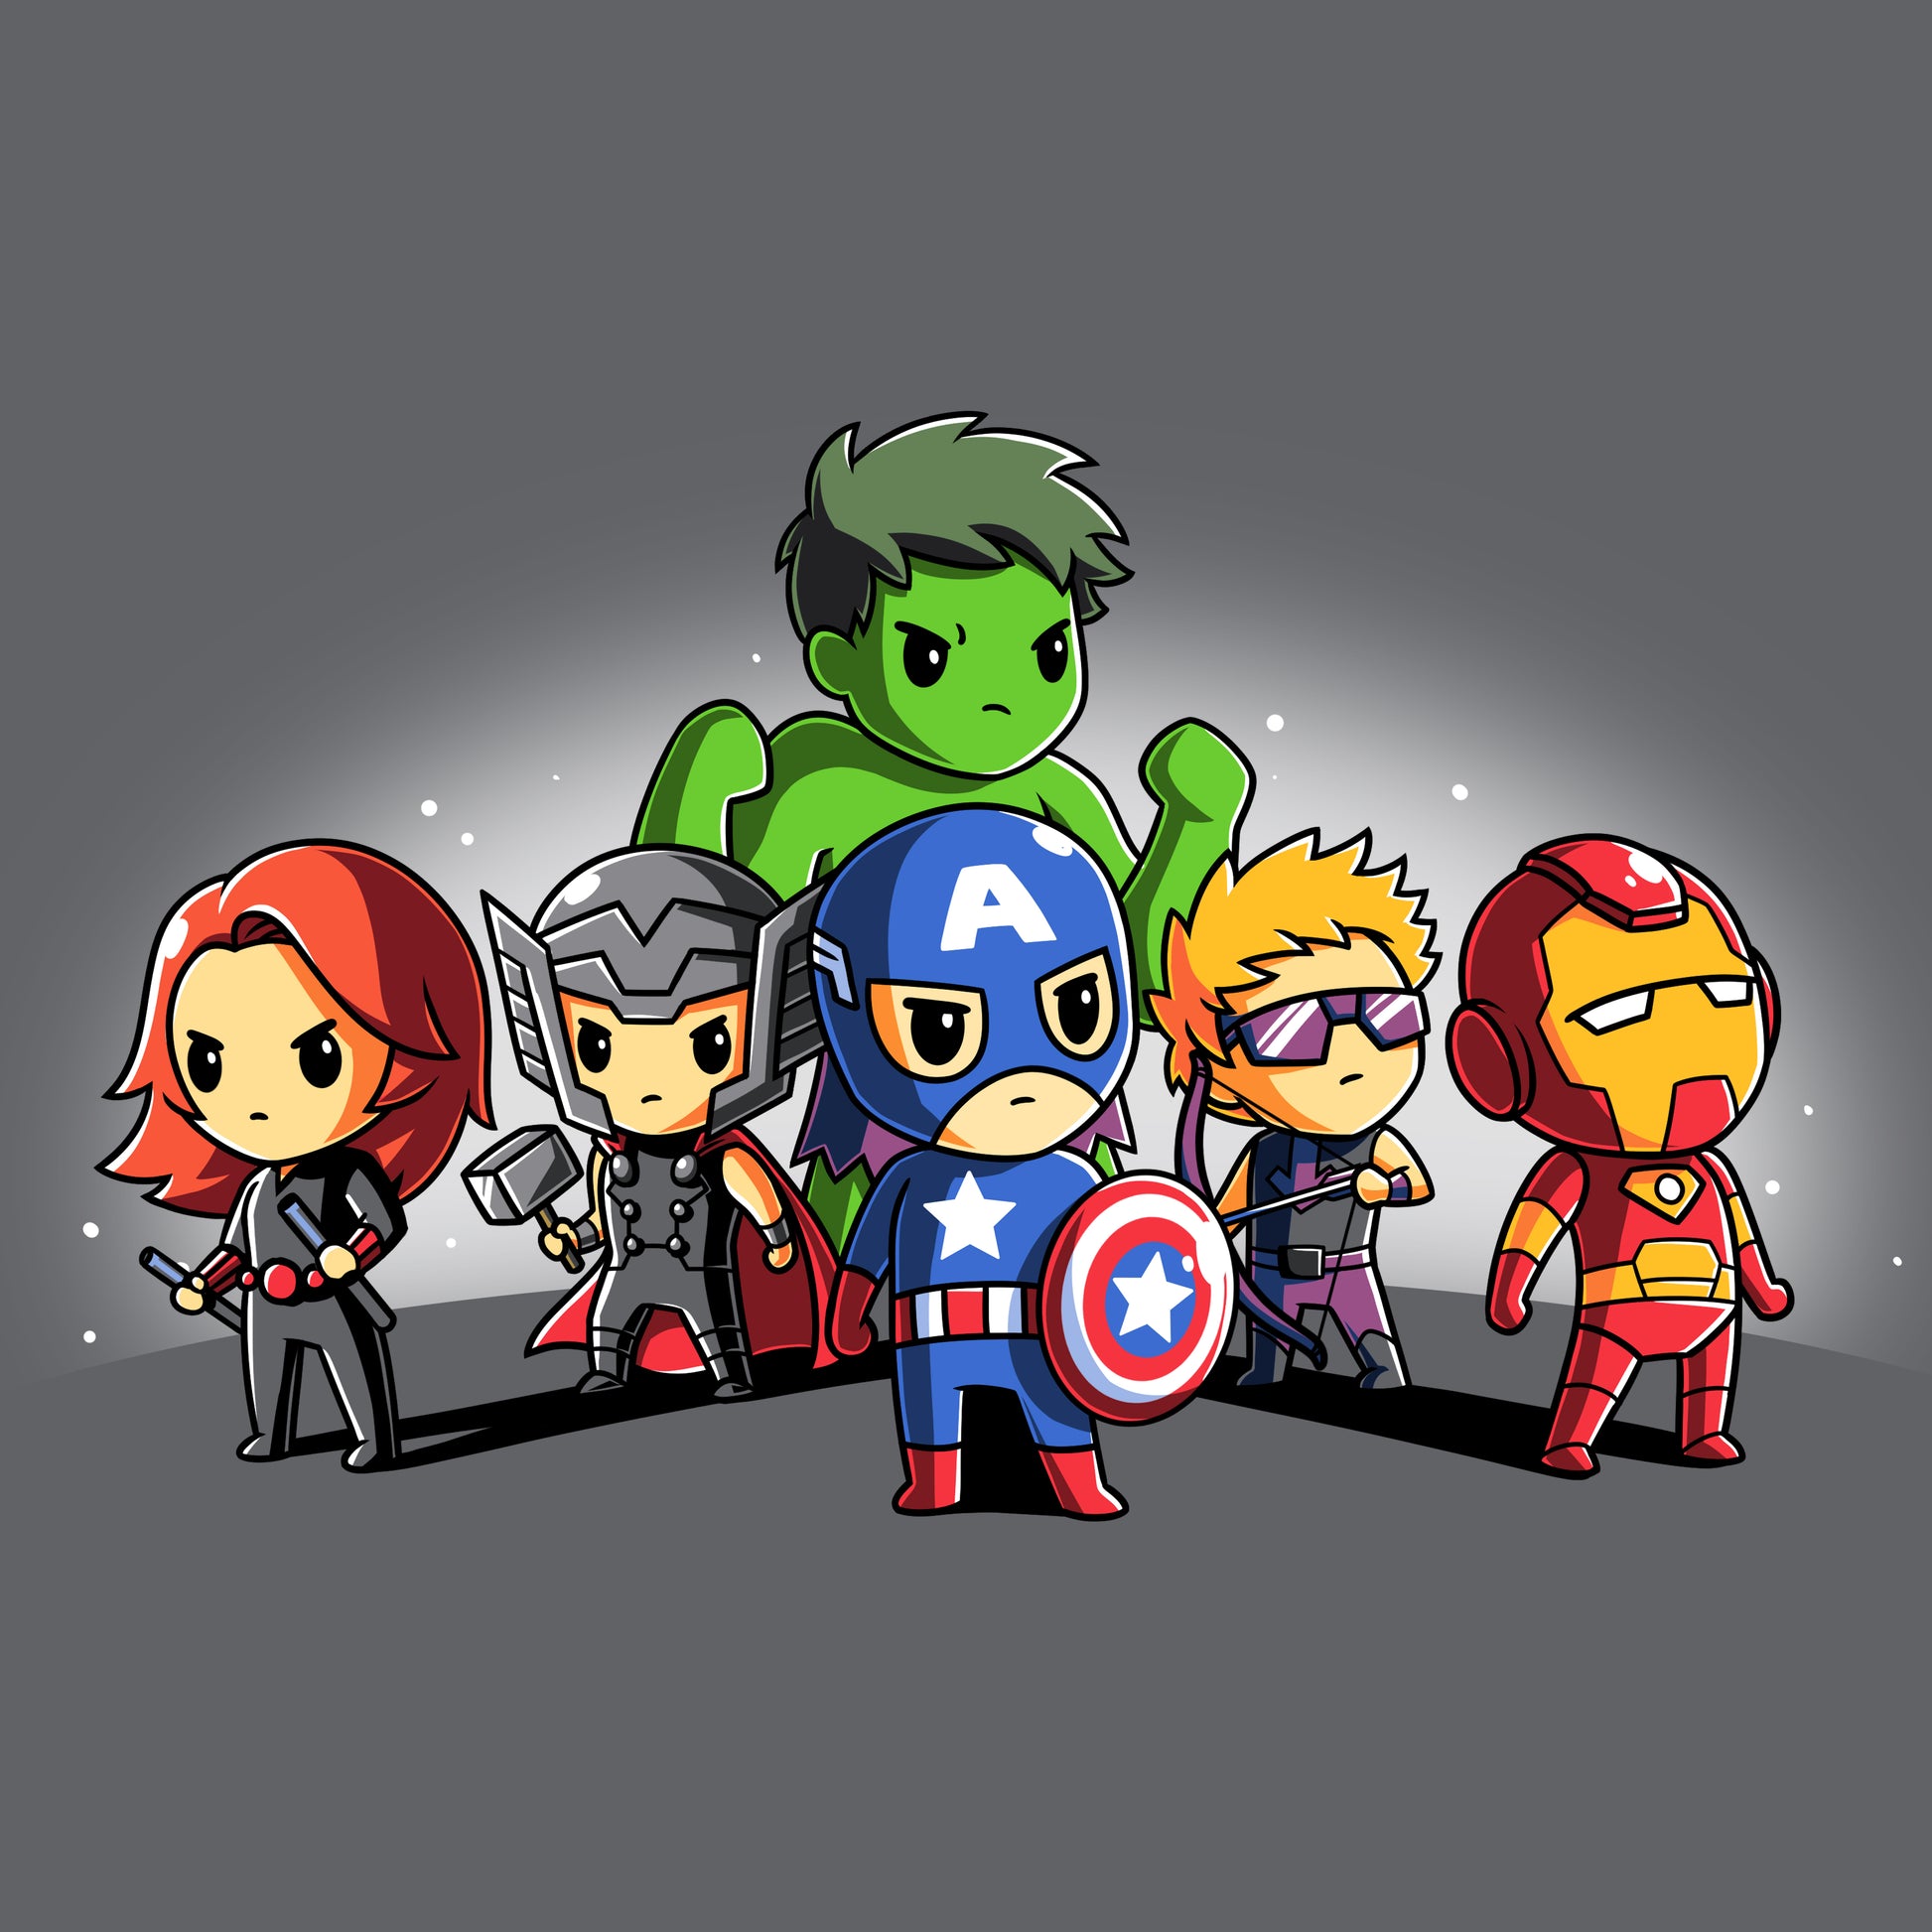 A group of Avengers Assembled characters on a grey background featuring Hulk and Black Widow from Marvel.